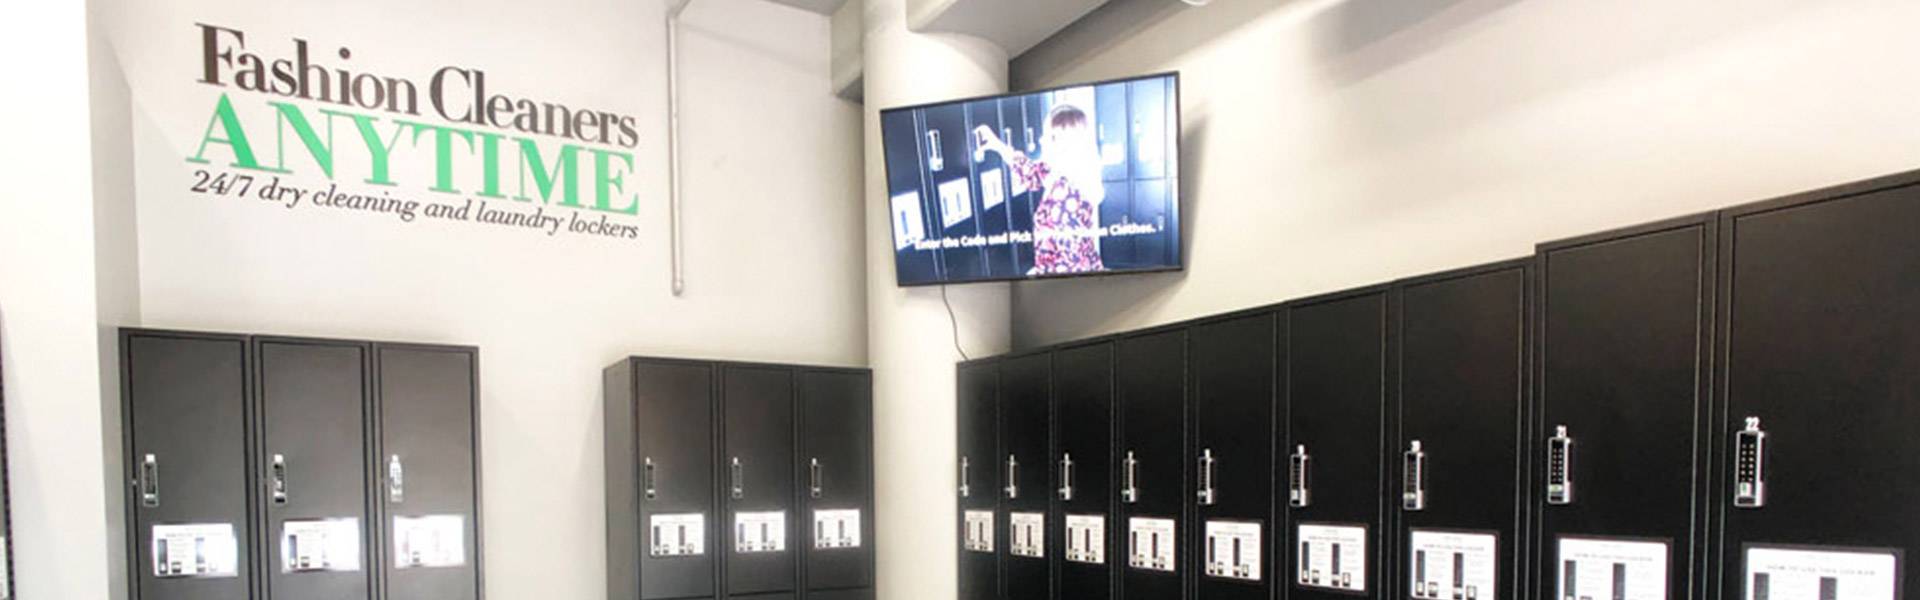 Fashion Cleaners Lockers